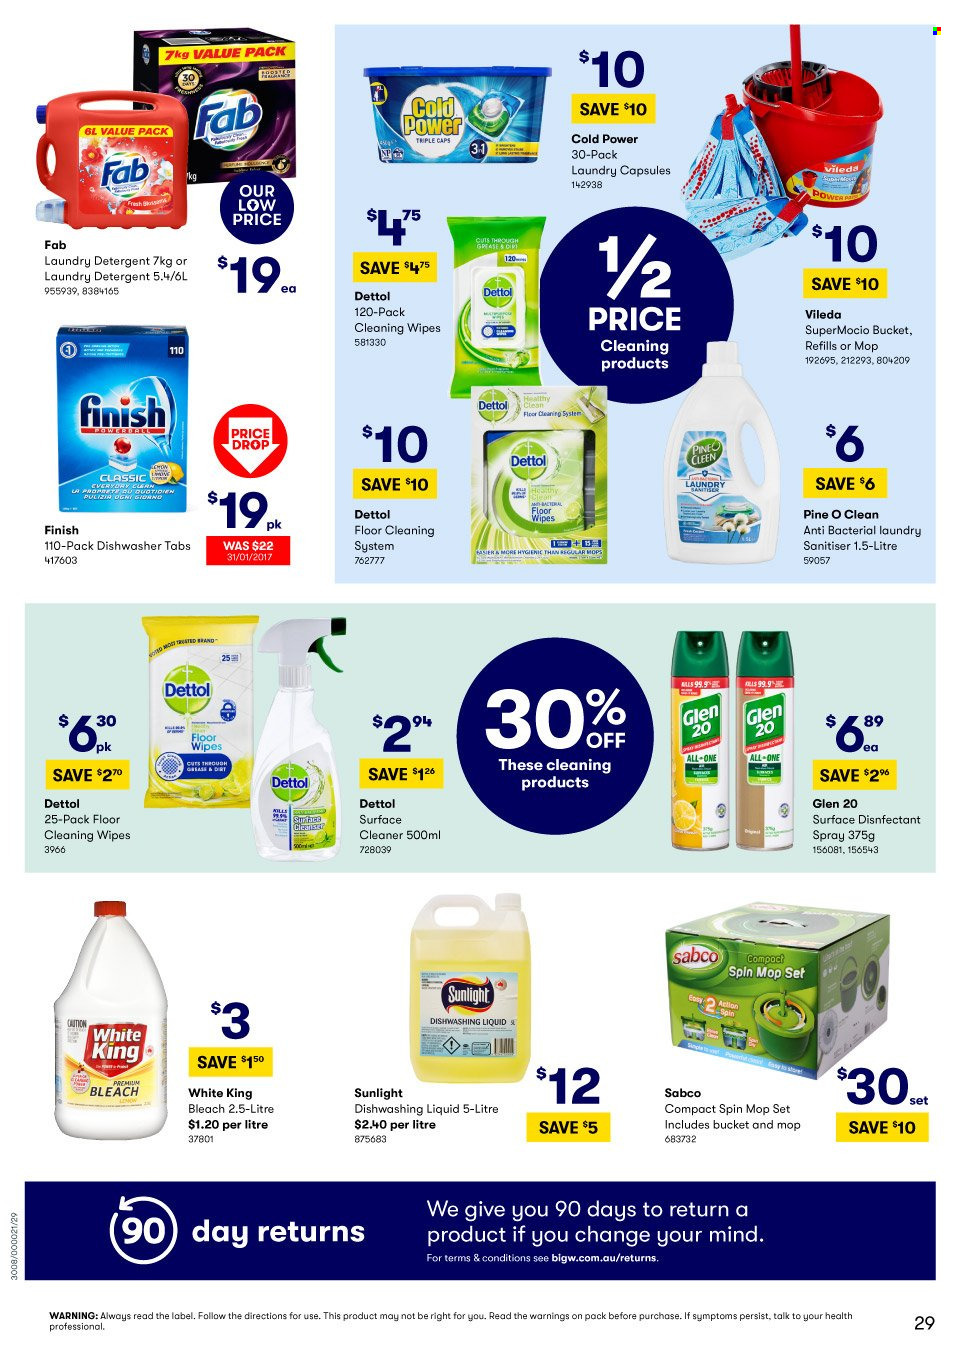 thumbnail - BIG W Catalogue - Sales products - cleansing wipes, wipes, Dettol, detergent, cleaner, bleach, Sabco, Fab, laundry detergent, laundry capsules, Sunlight, dishwashing liquid, Vileda, spin mop, mop, cap. Page 29.